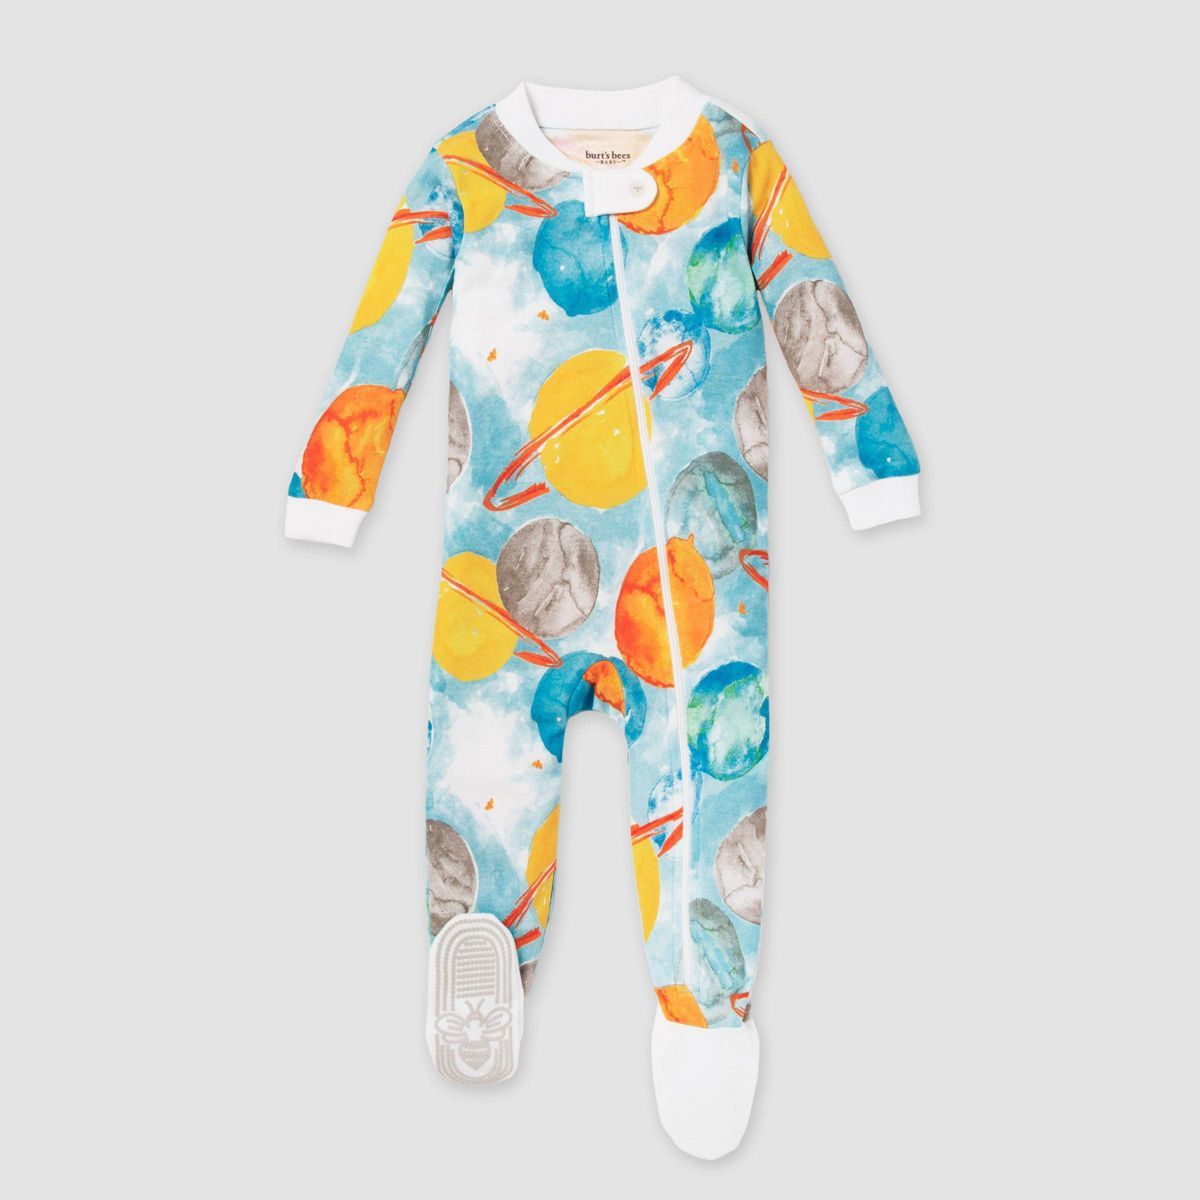 Burt's Bees Baby® Baby Boys' Outerspace Snug Fit Footed Pajama - Aqua Blue | Target